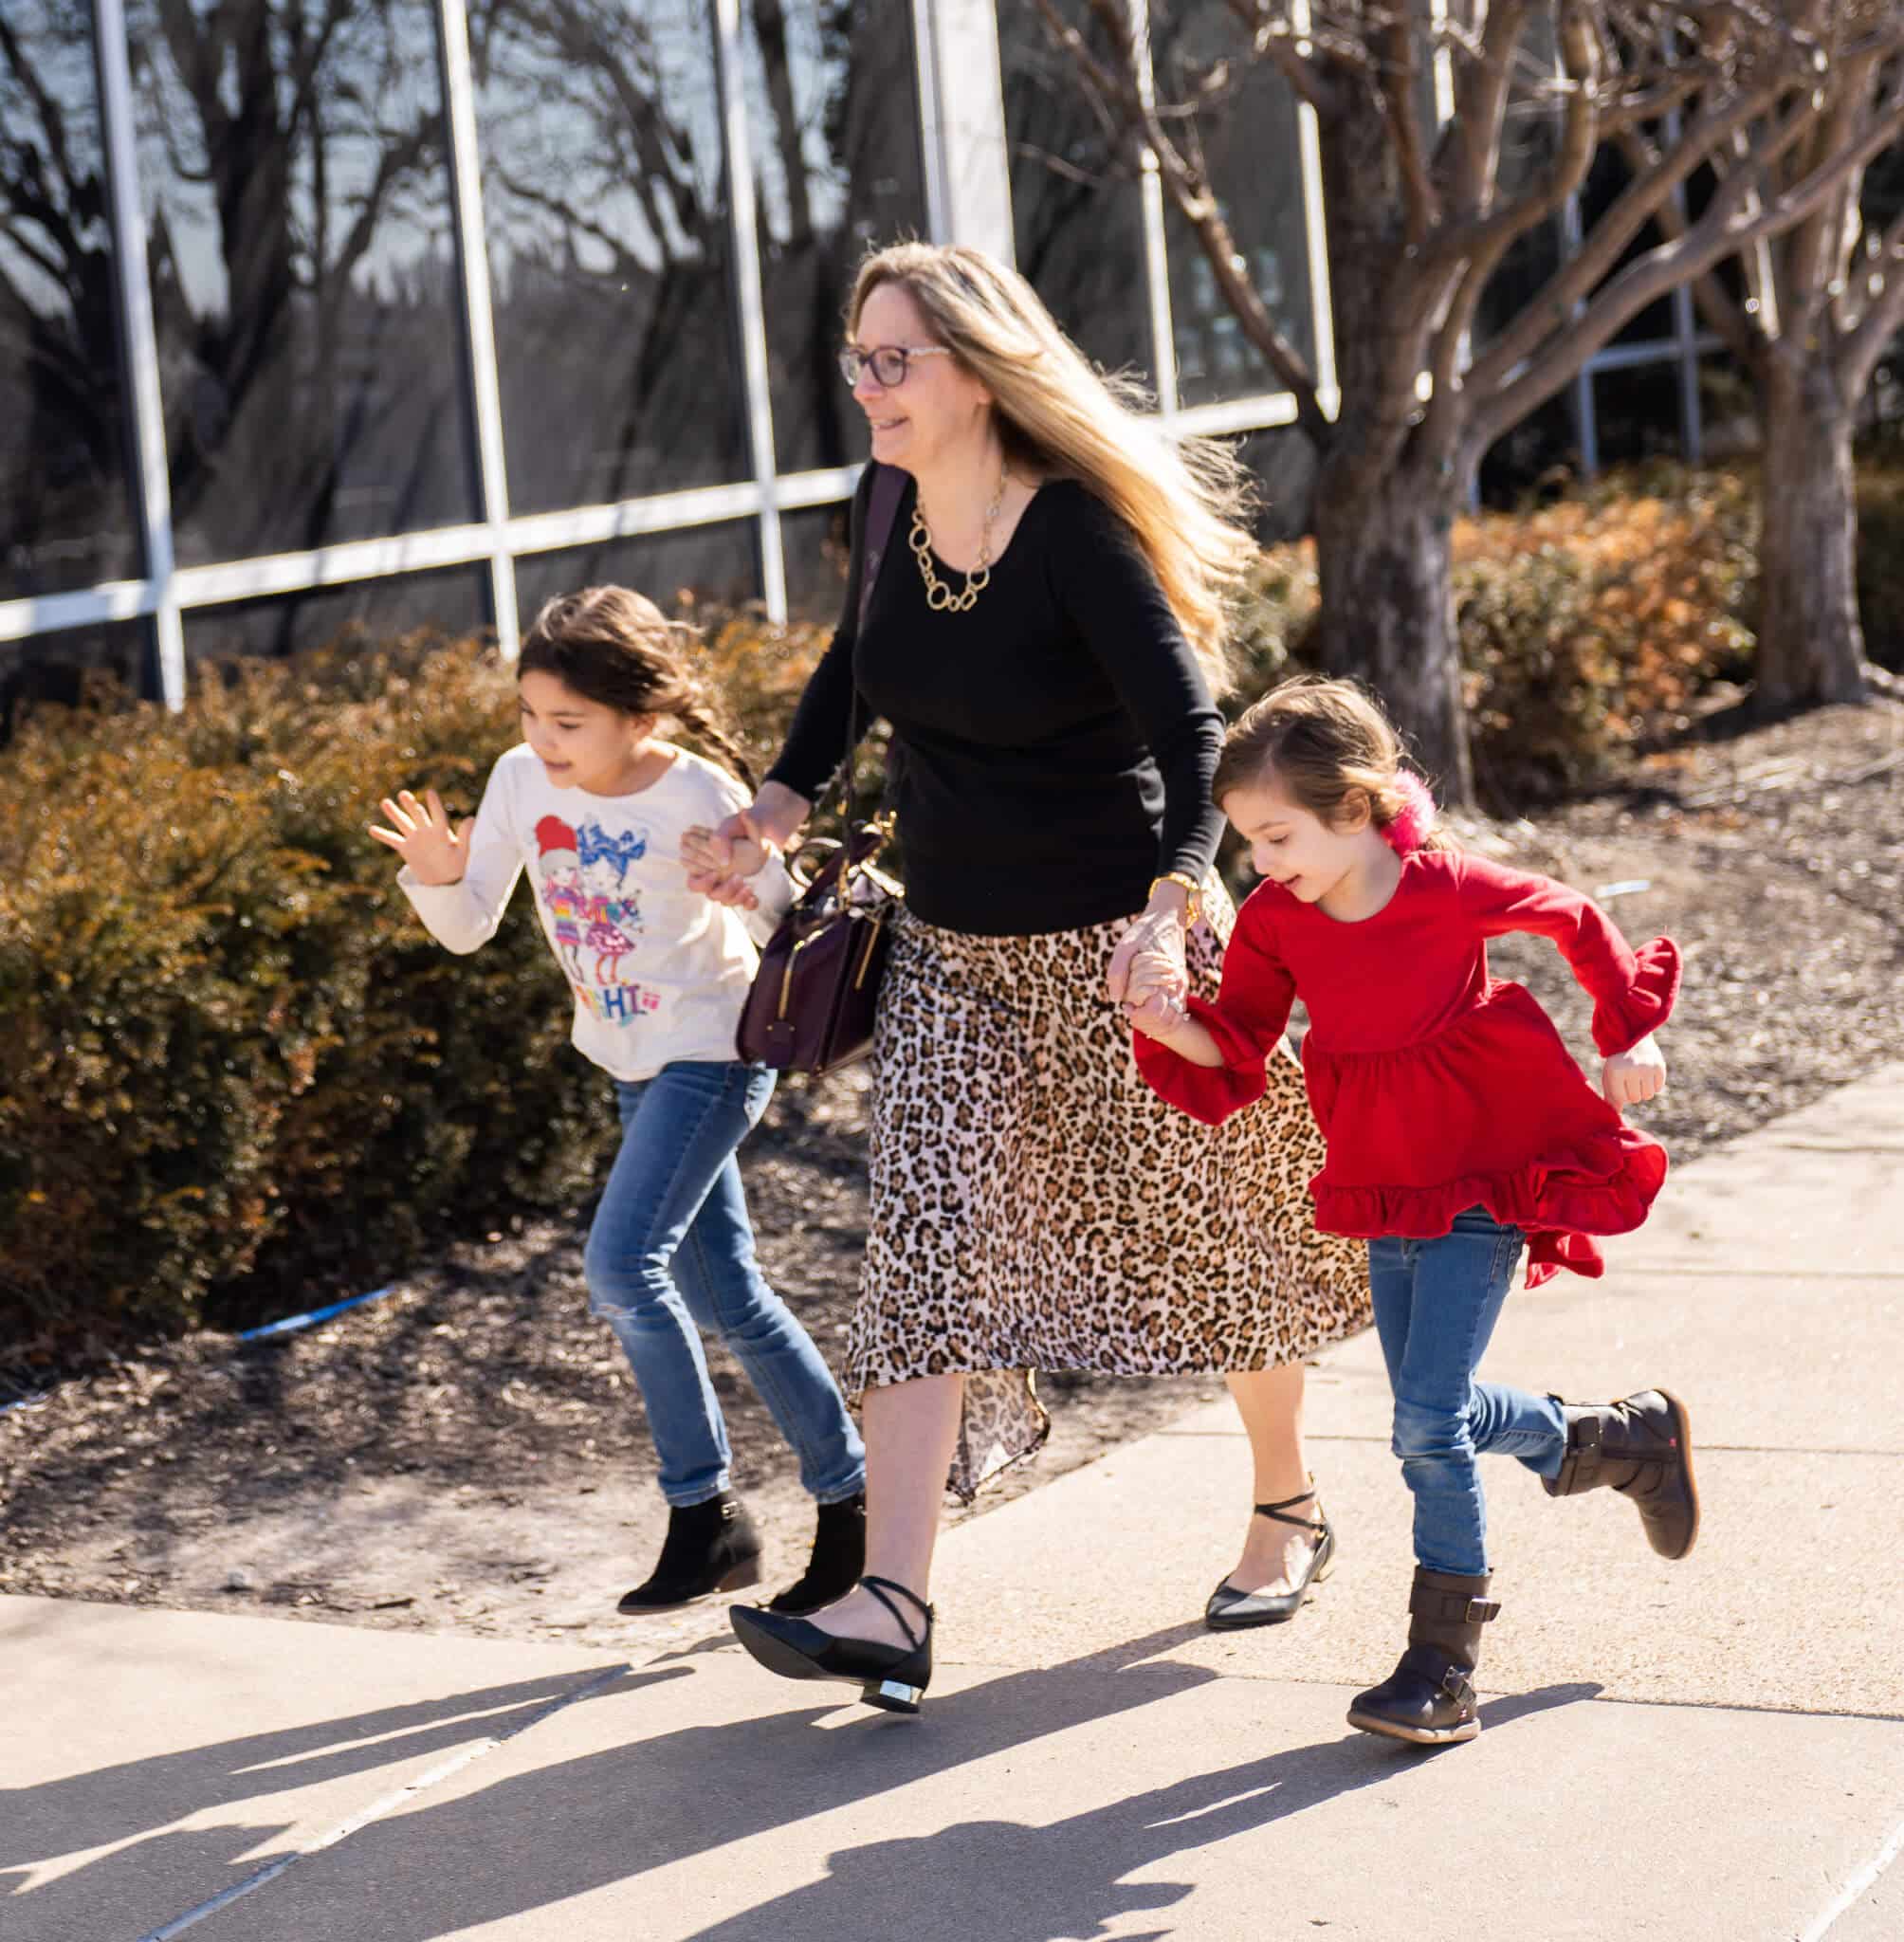 Kids excited for church as family walks into Omaha church